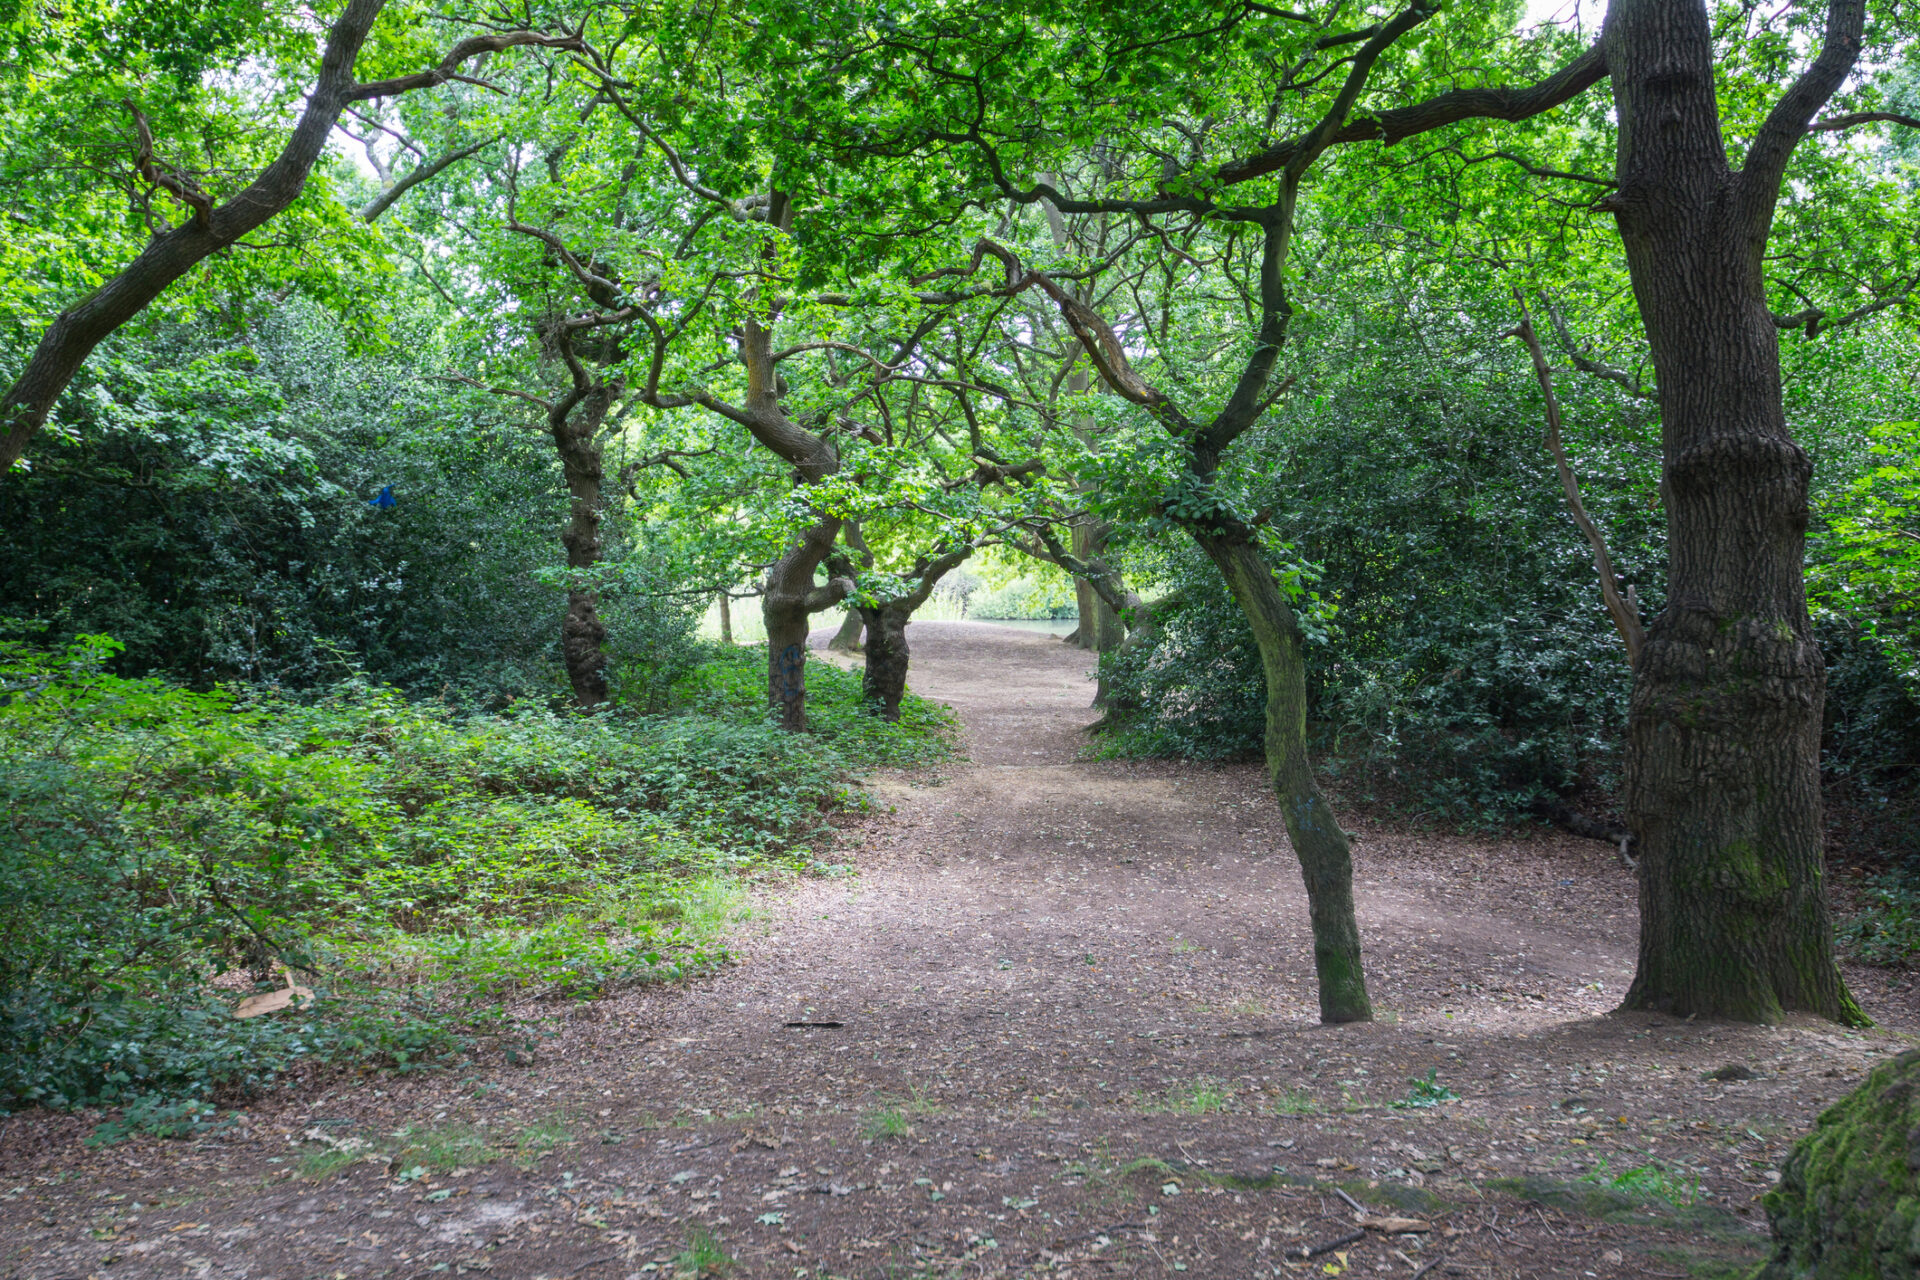 Epping Forest walks and trees make a great outdoor environment for Londoners to head out to to escape the pressures of urban life.